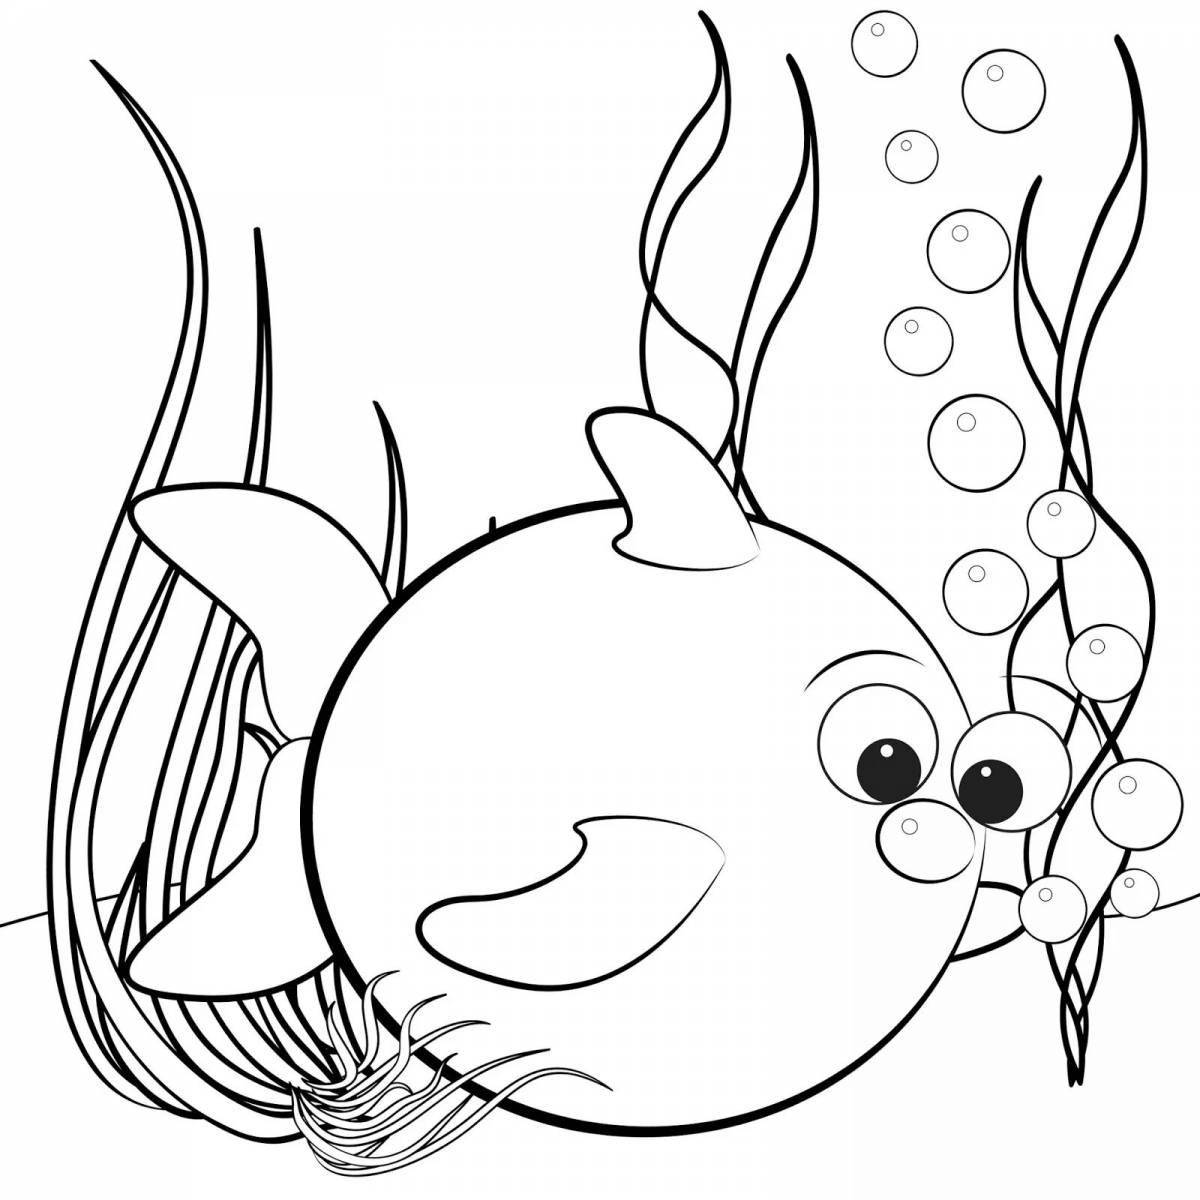 Coloring page holiday fish with algae